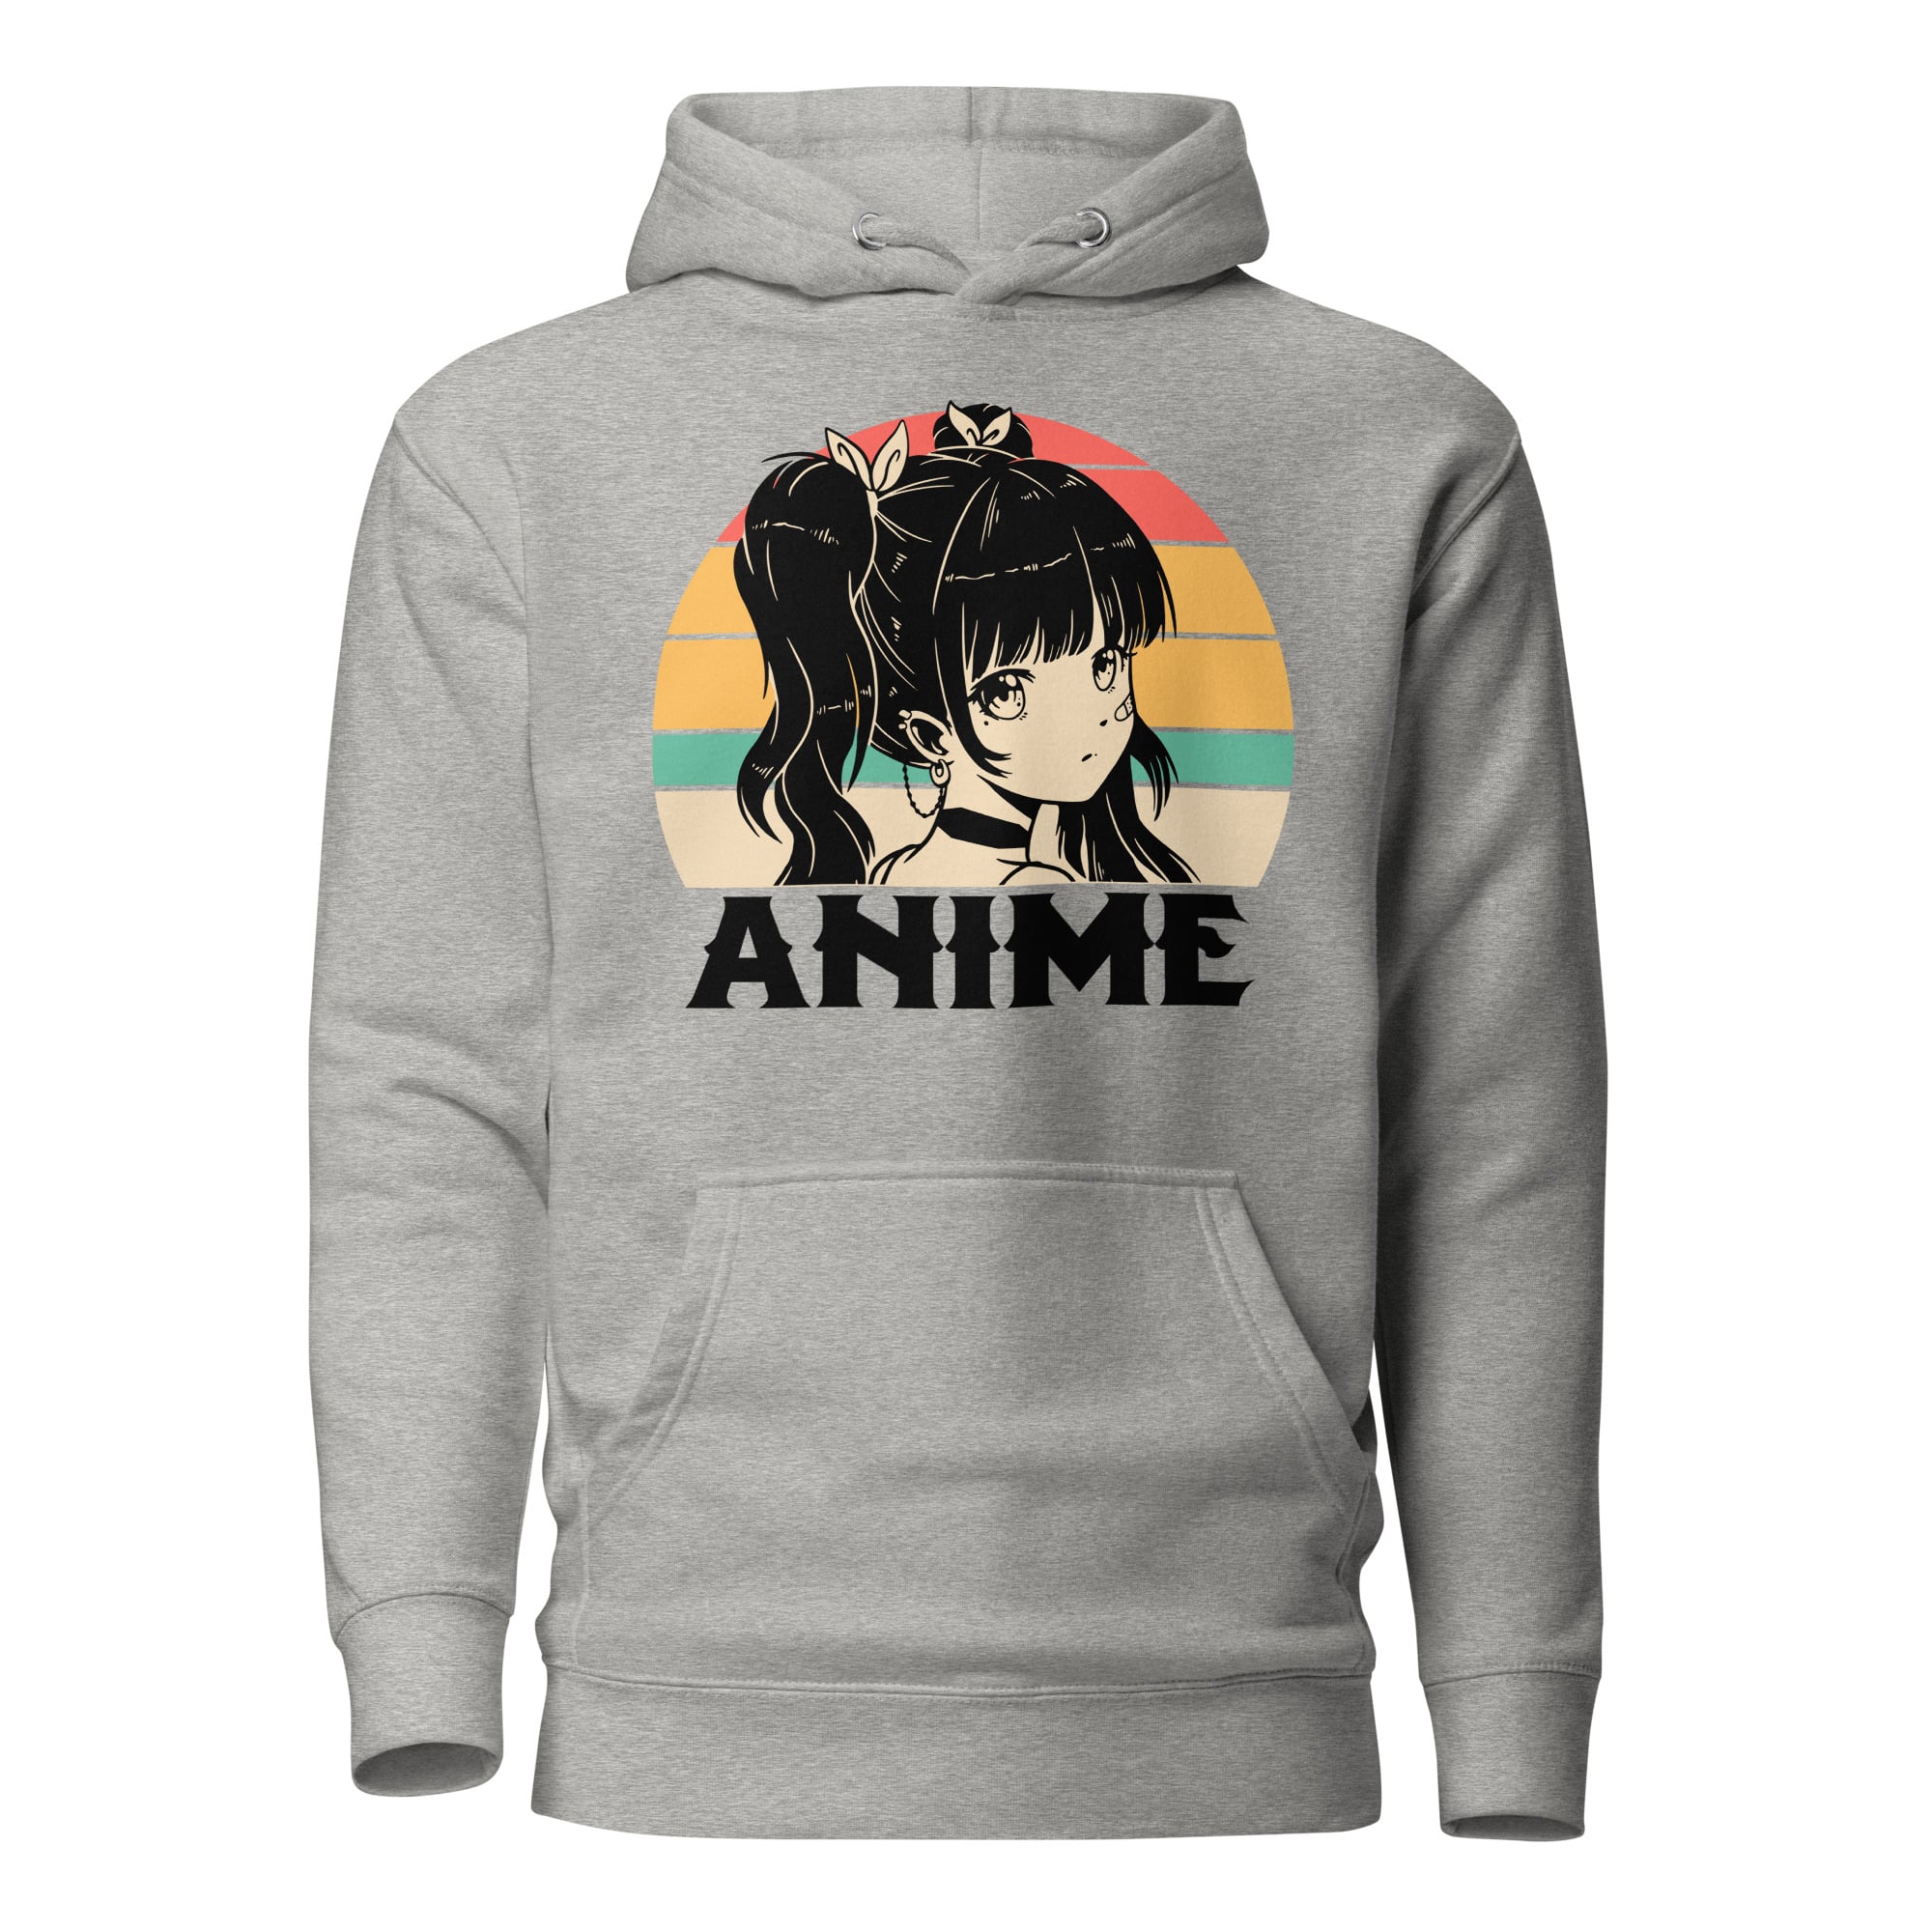 Anime Girl Sunset Unisex Hoodie Video game store Gaming merchandise Gaming accessories shop Online gaming store Video game shop near me Gaming console store PC gaming store Gaming gear shop Retro gaming shop Board game shop Anime merchandise Anime store online Japanese anime shop Anime figurines Manga shop Anime DVDs Anime accessories Anime apparel Anime collectibles Anime gifts